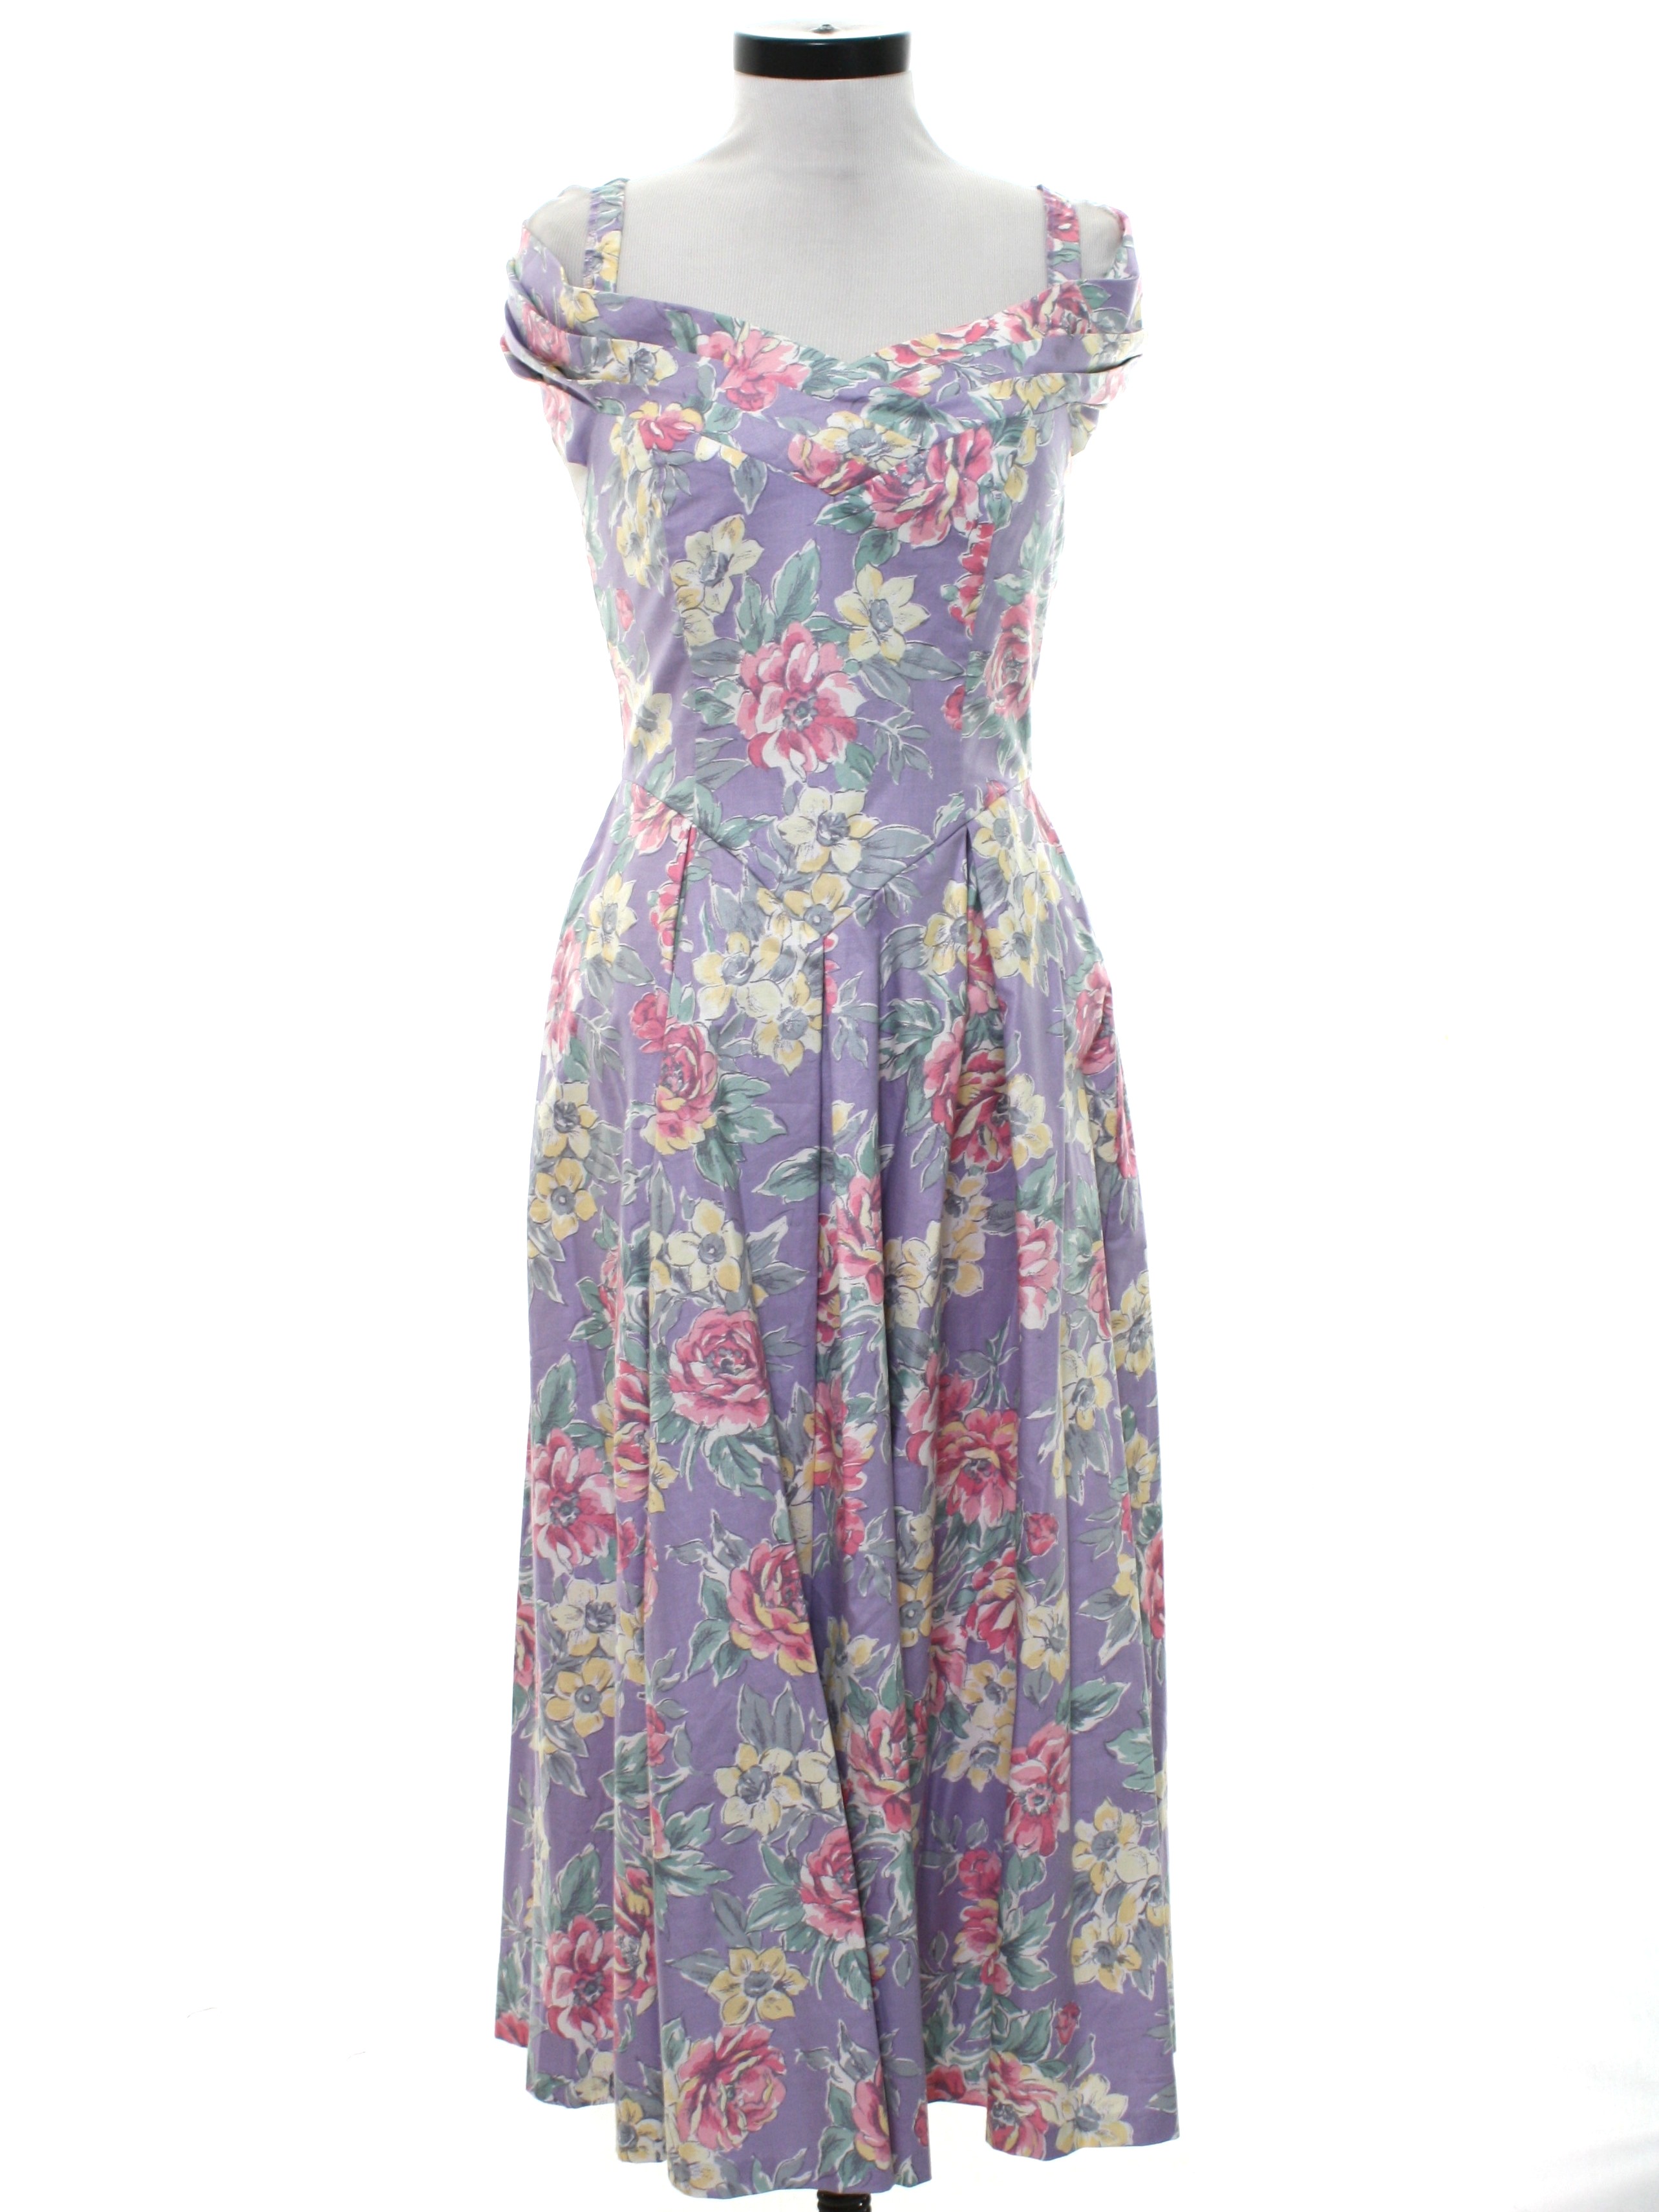 Retro 1980s Dress: 80s -Laura Ashley- Womens lavender with shades of ...